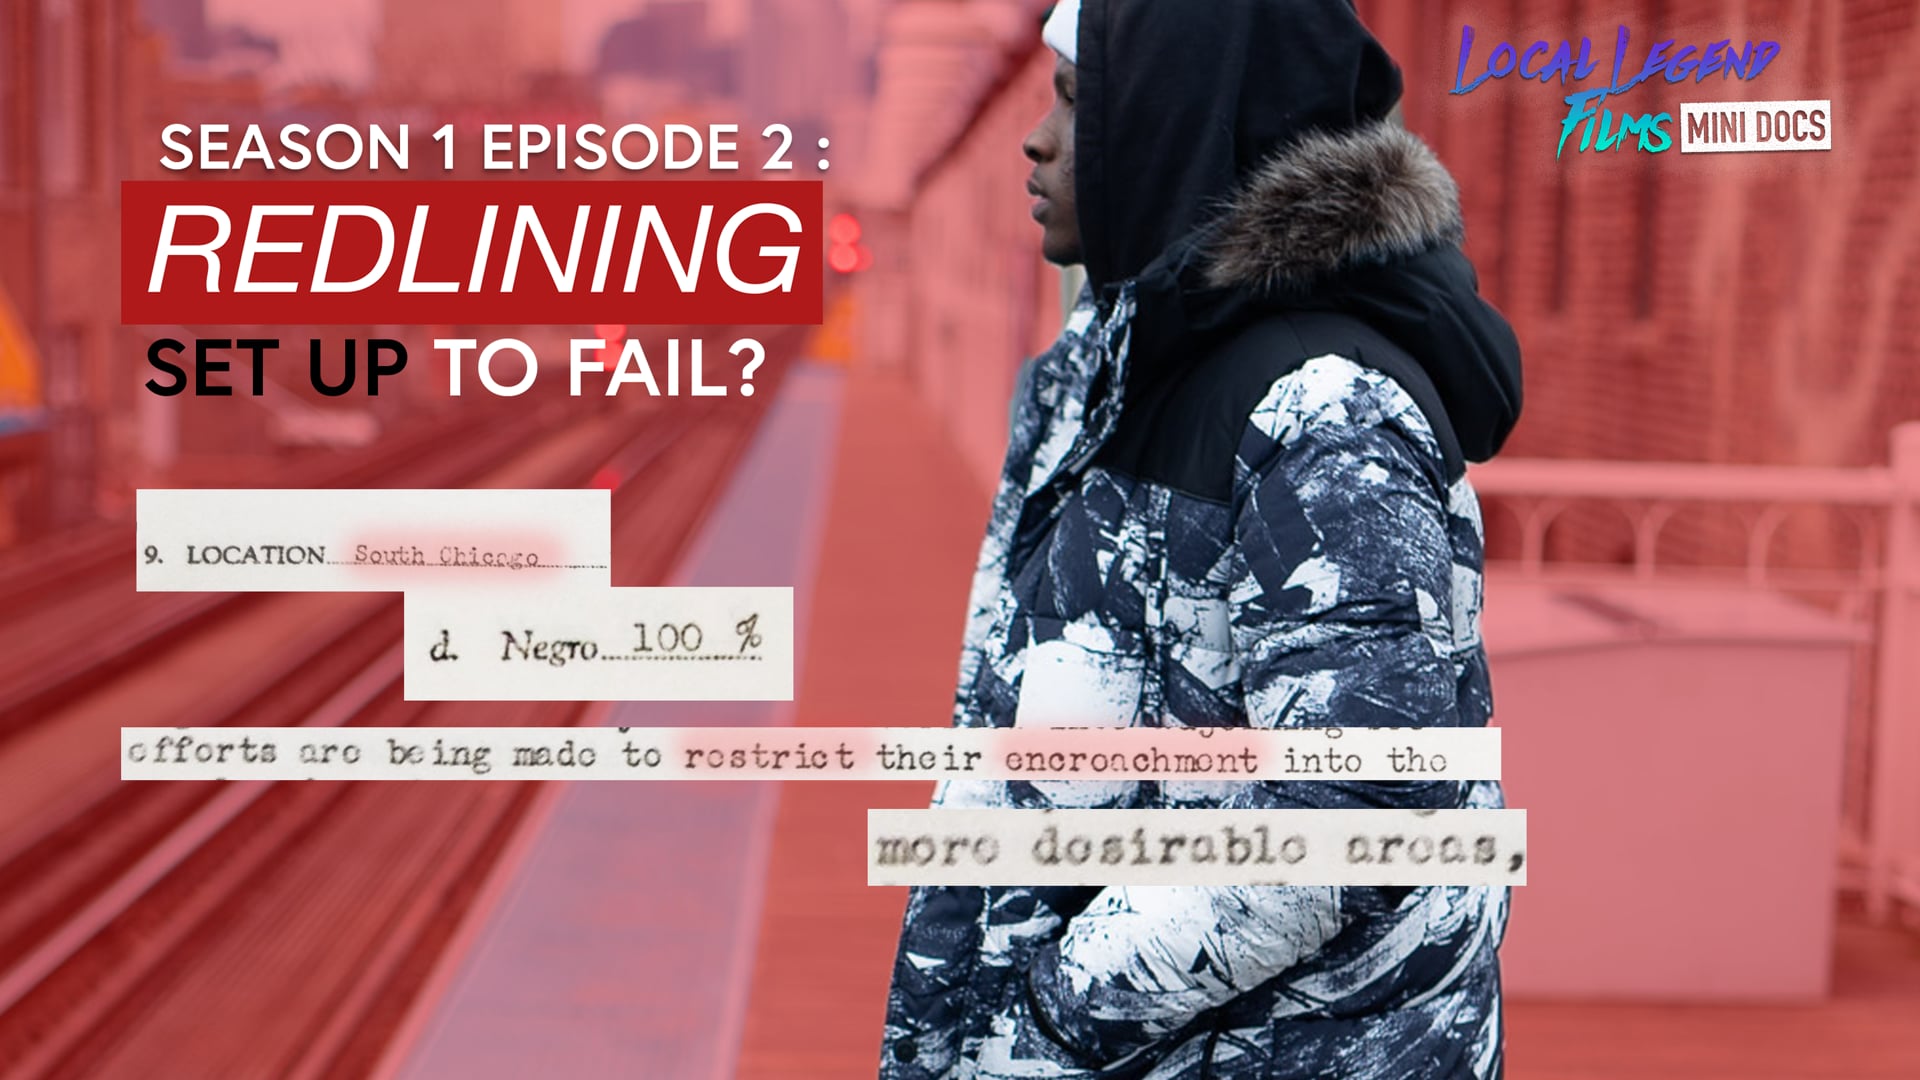 SET UP TO FAIL? | S1 EP 2 